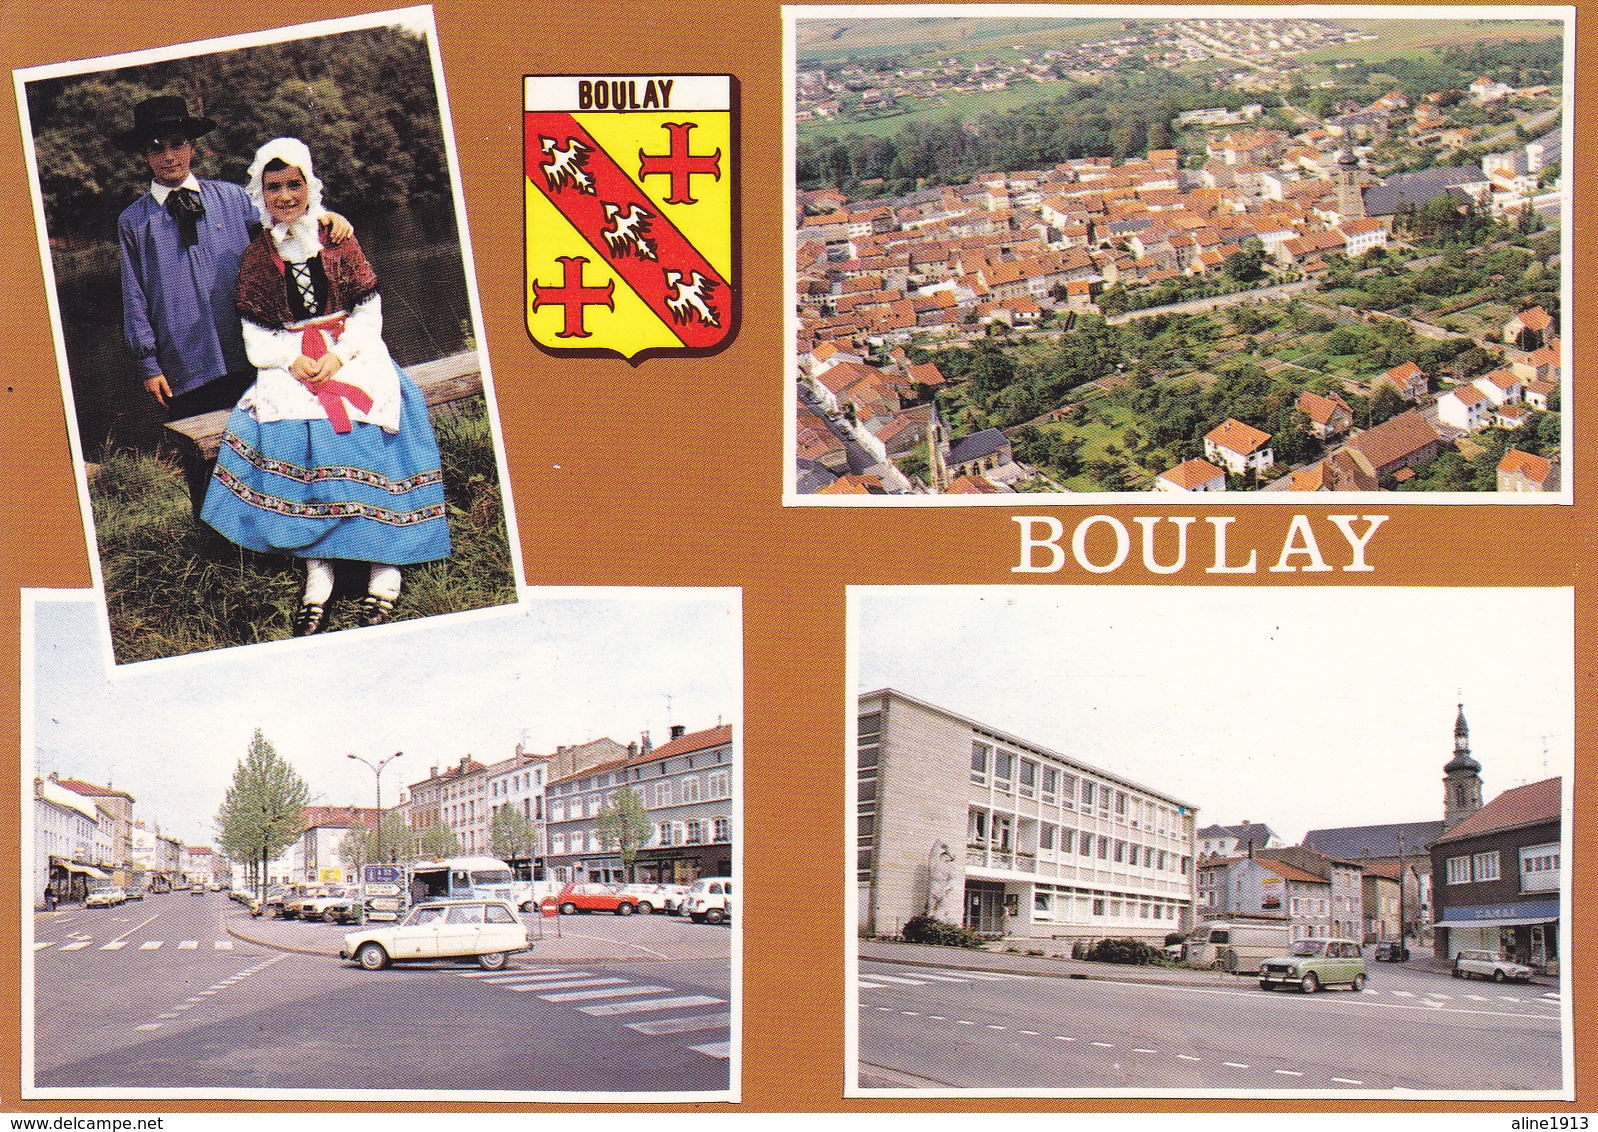 57 BOULAY / MULTIVUES / BLASON / VOITURES - Boulay Moselle